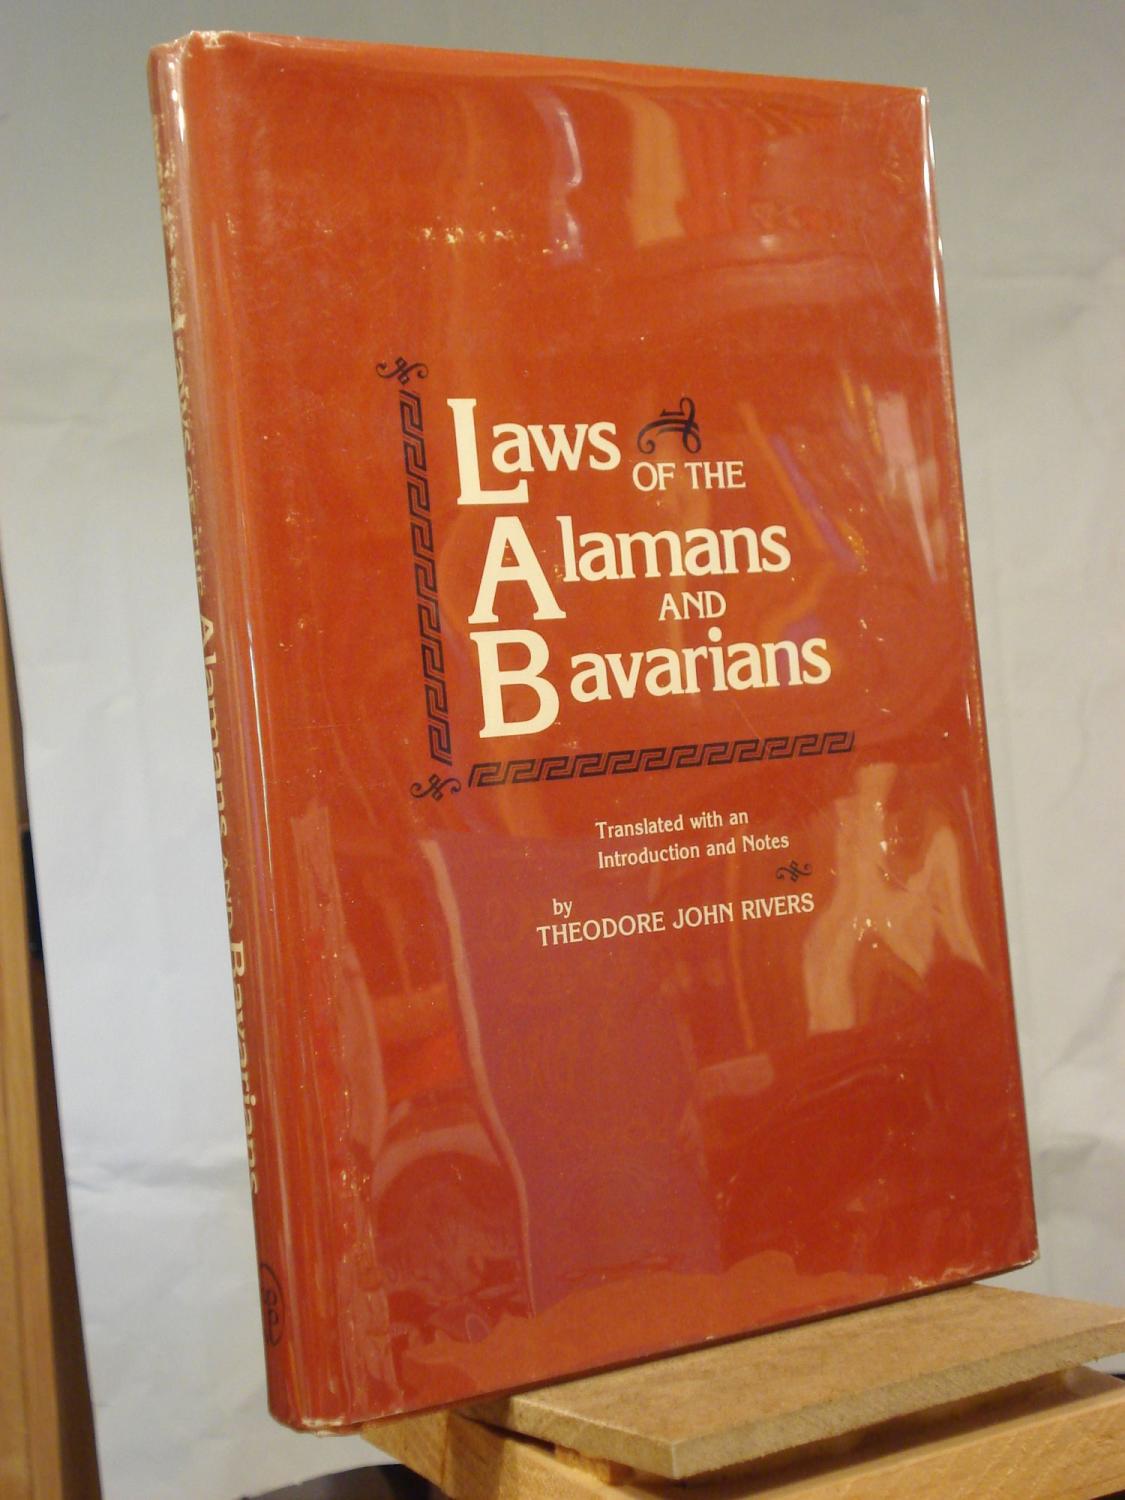 Laws of the Alamans and Bavarians